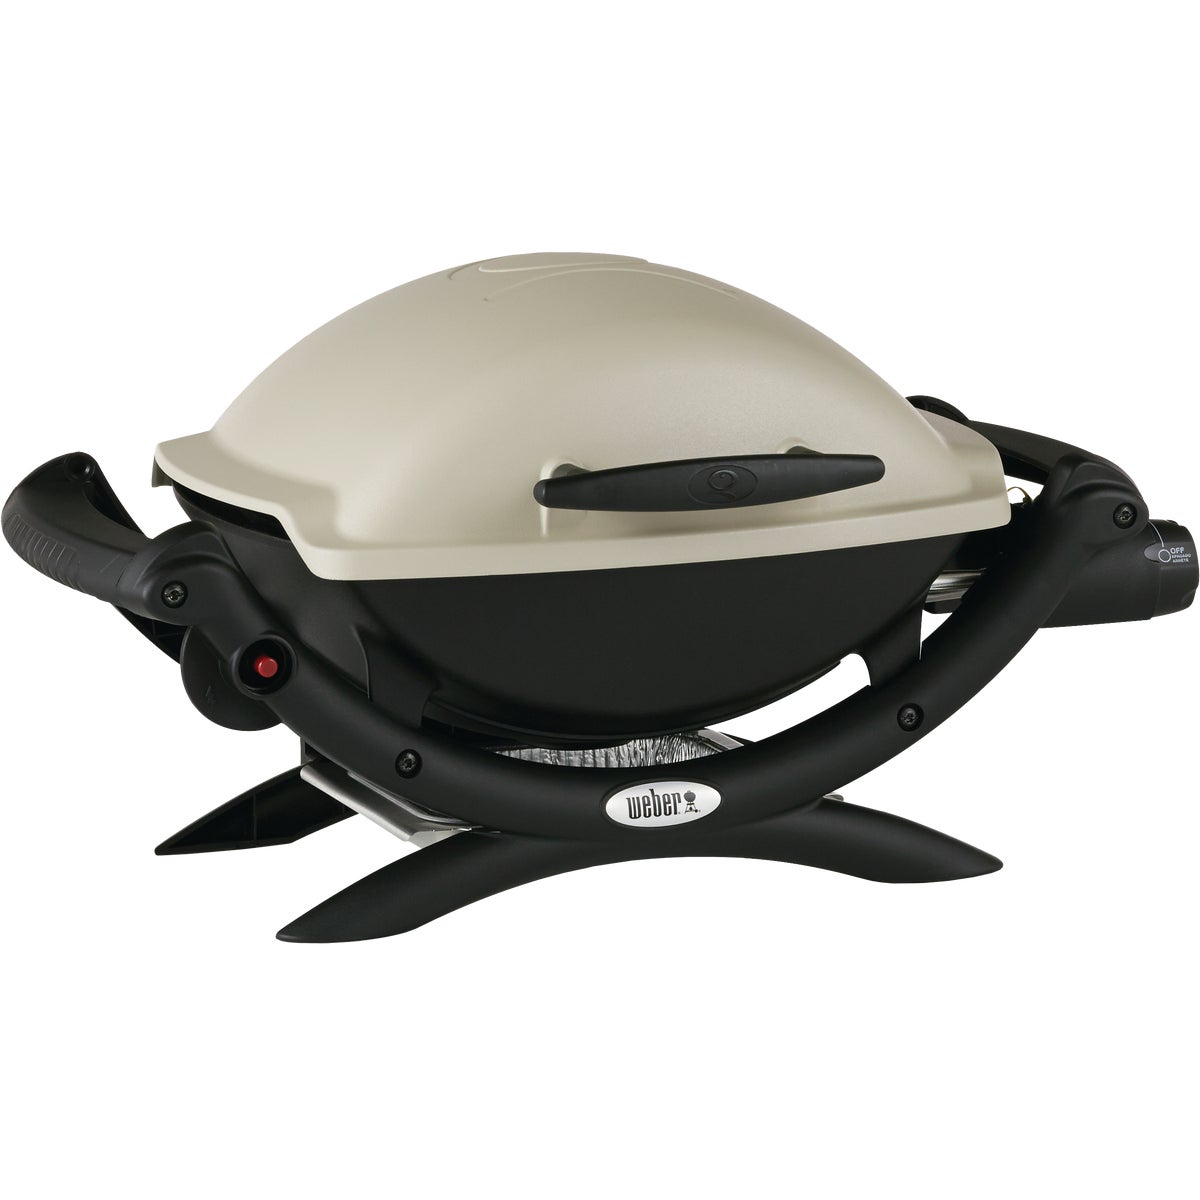 Item 800745, Durable portable gas grill ideal to take camping, tailgating, or just about